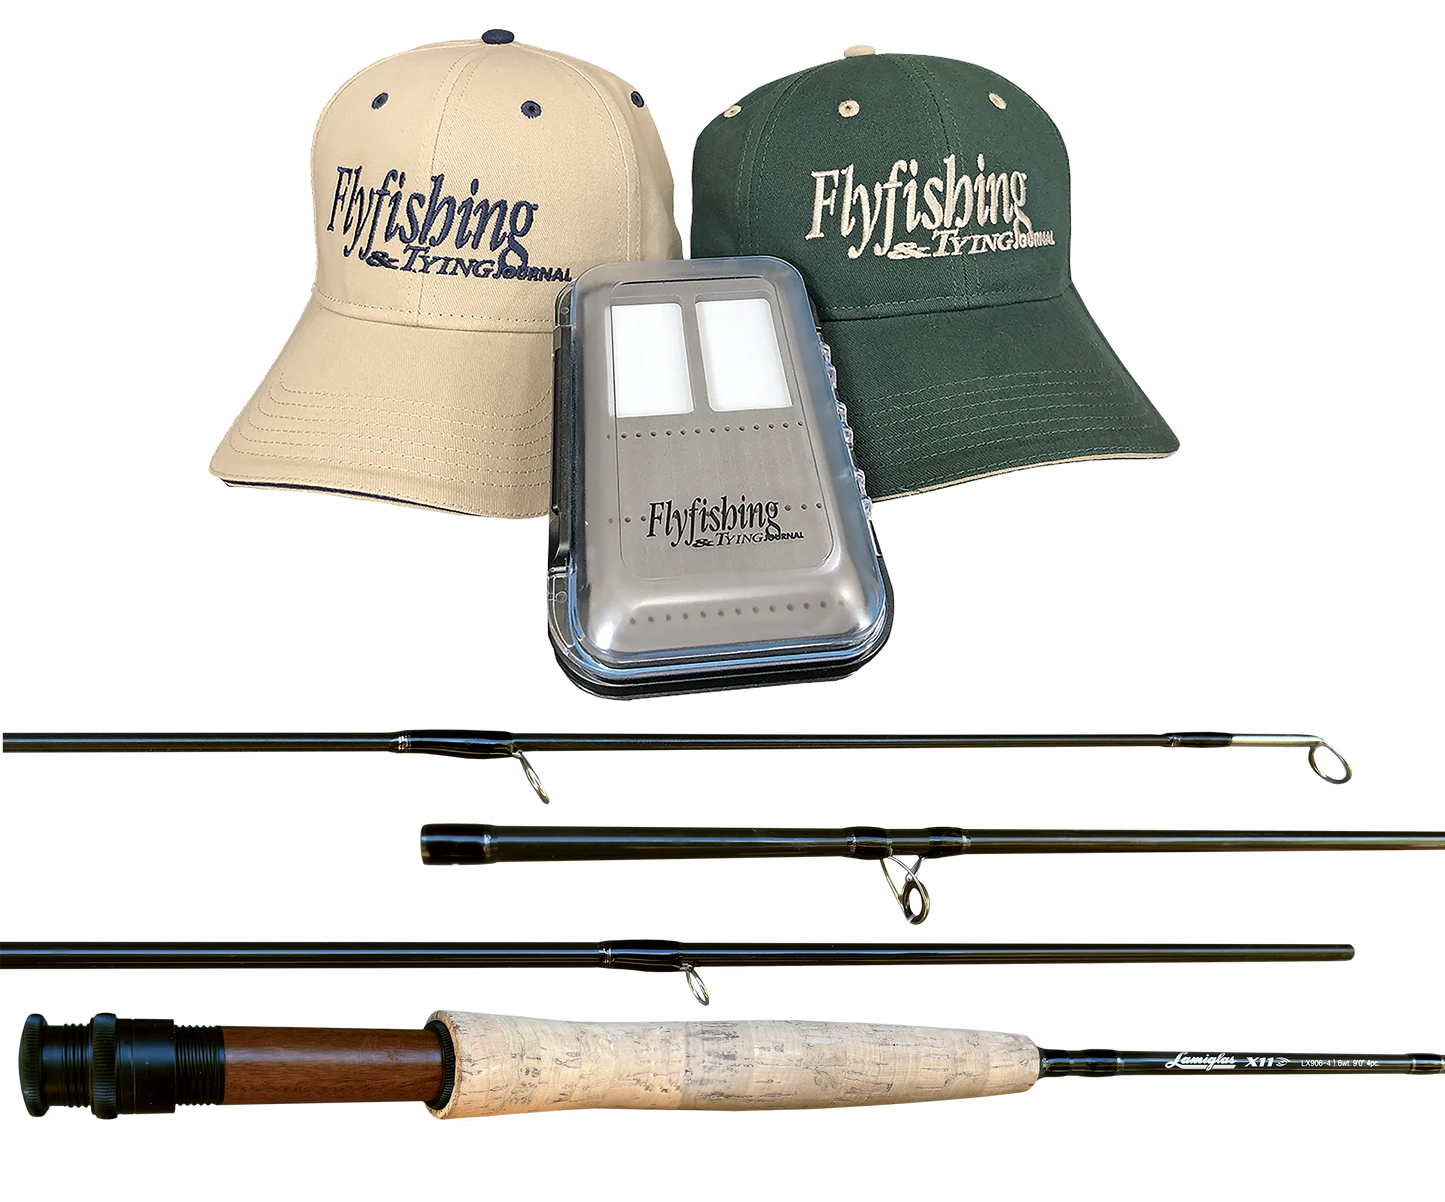 Get a Lamiglas 4 piece Travel Fly Rod and receive a FREE Flybox & "Lucky Hat" (Choose from Tan or Green) PLUS a 1 year STS Subscription